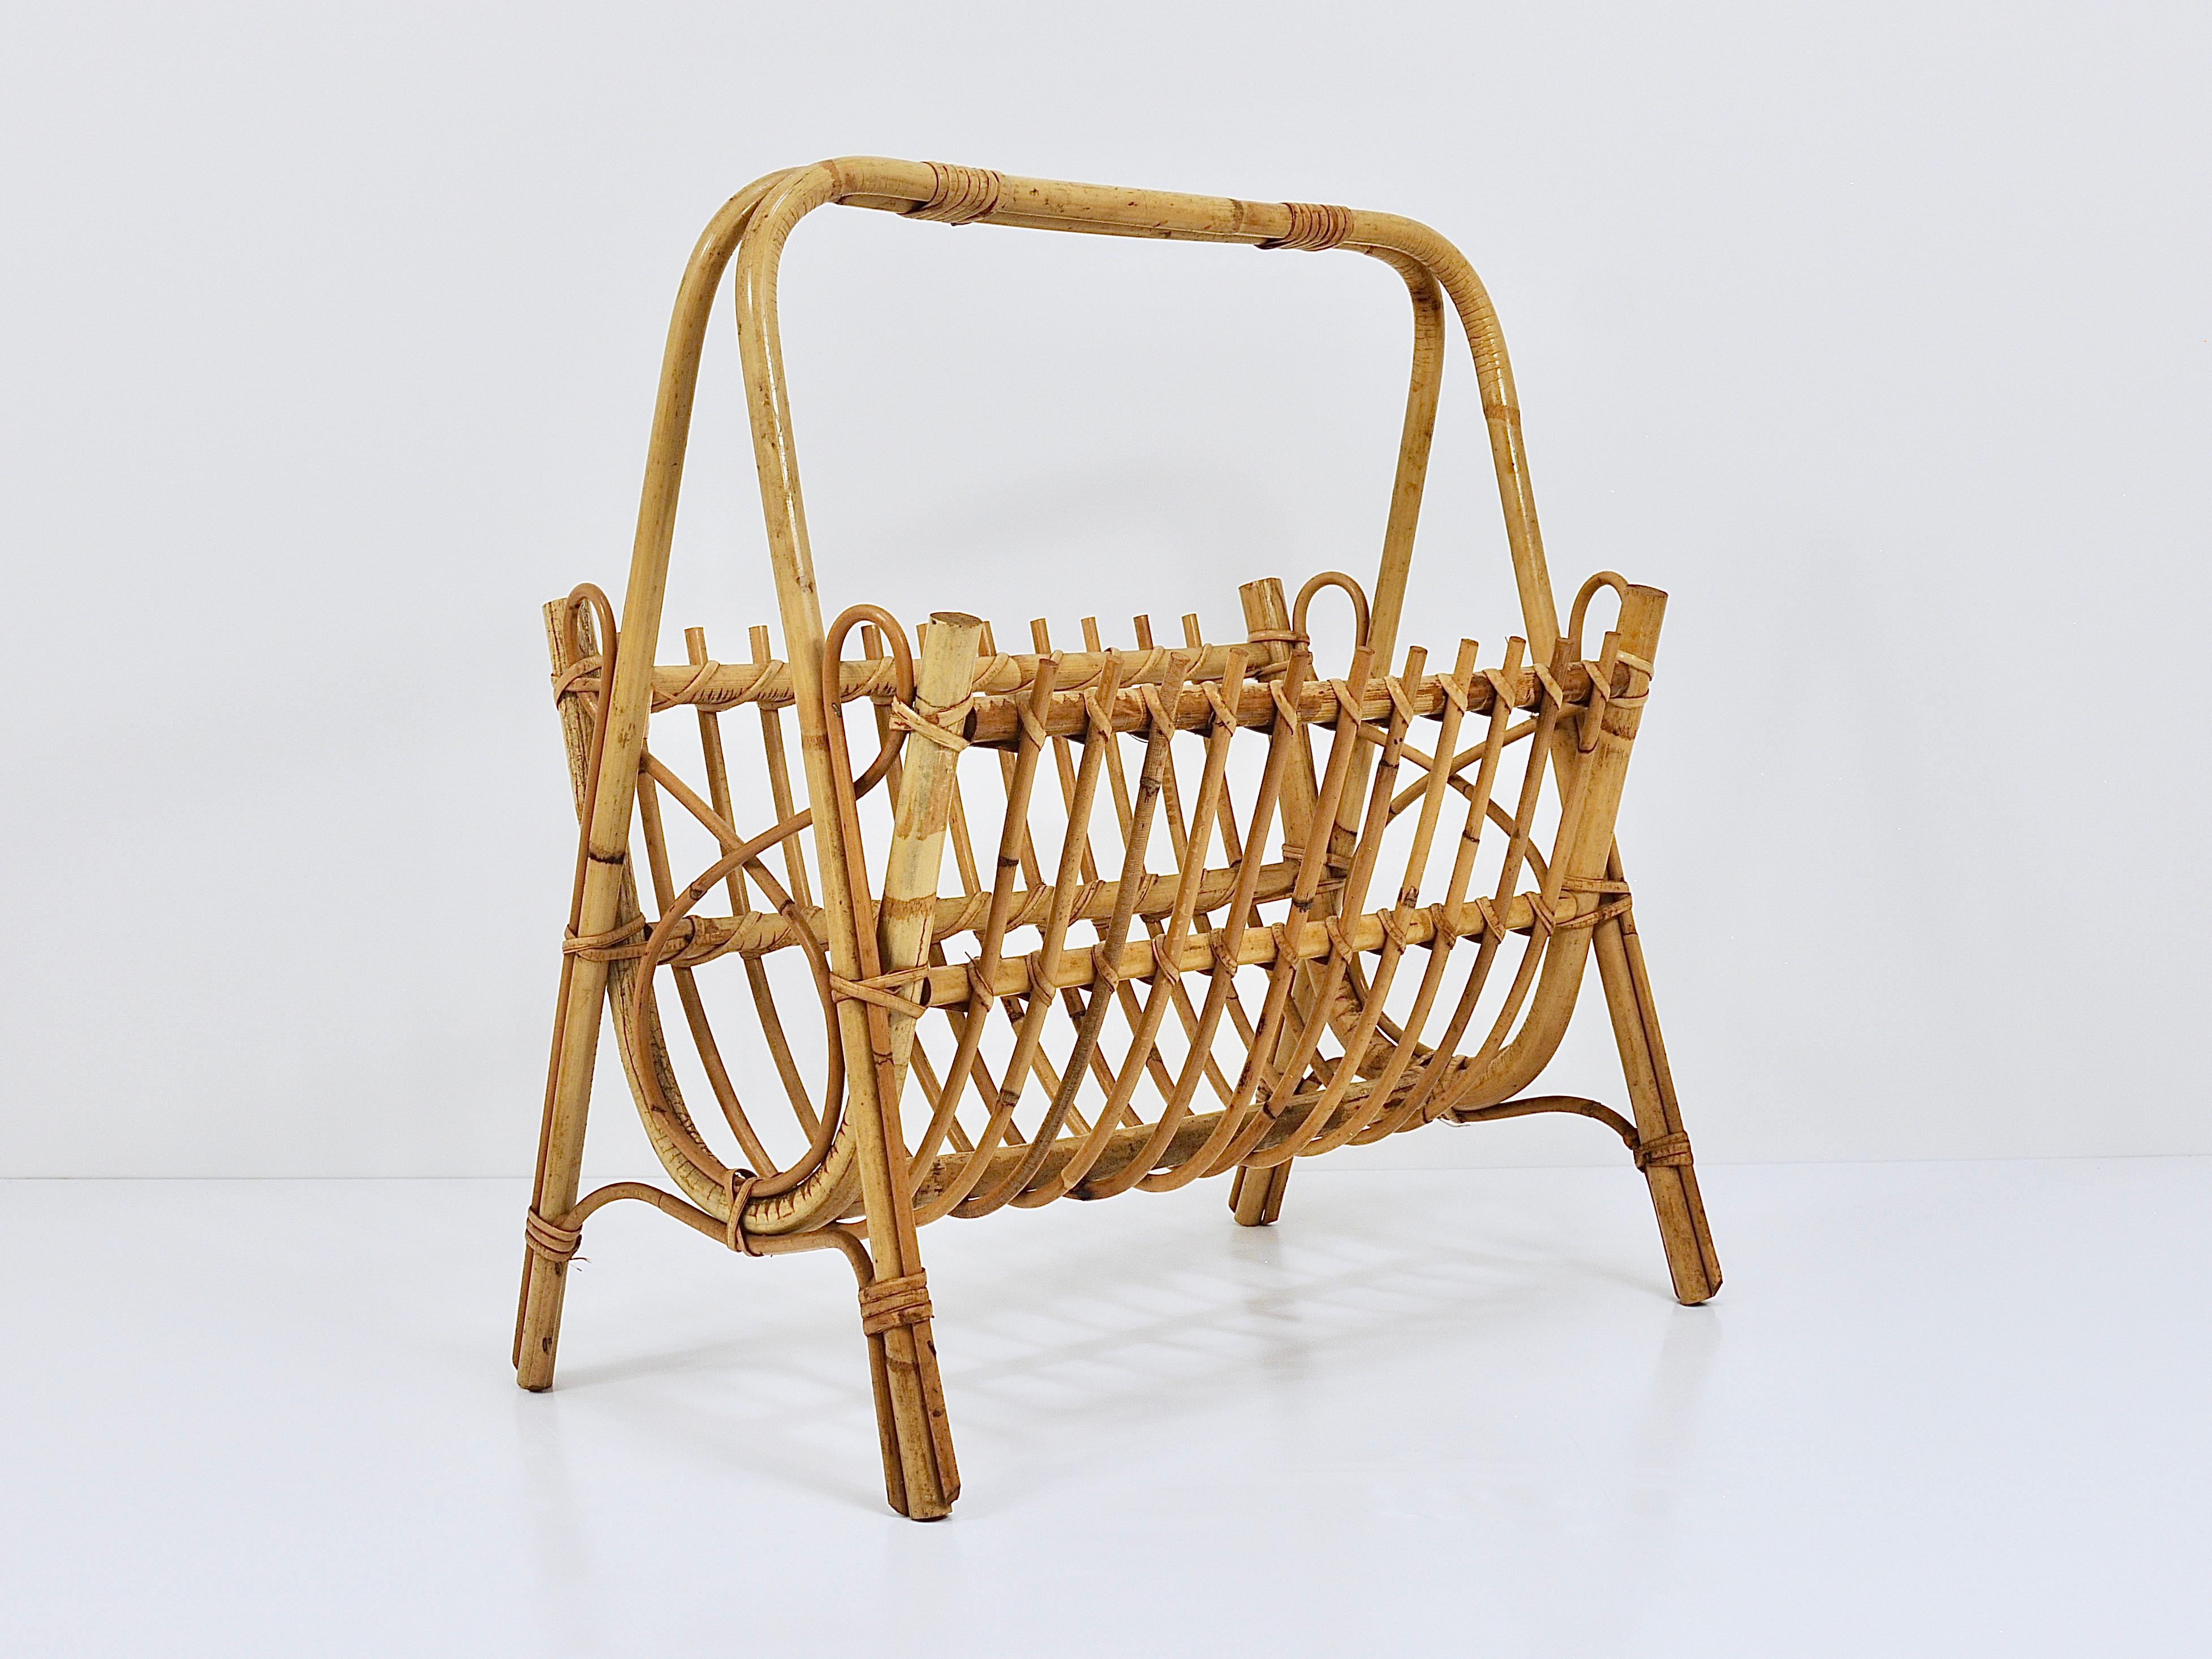 20th Century Franco Albini Style Rattan Bamboo Magazine Rack Newspaper Stand, France, 1950s For Sale